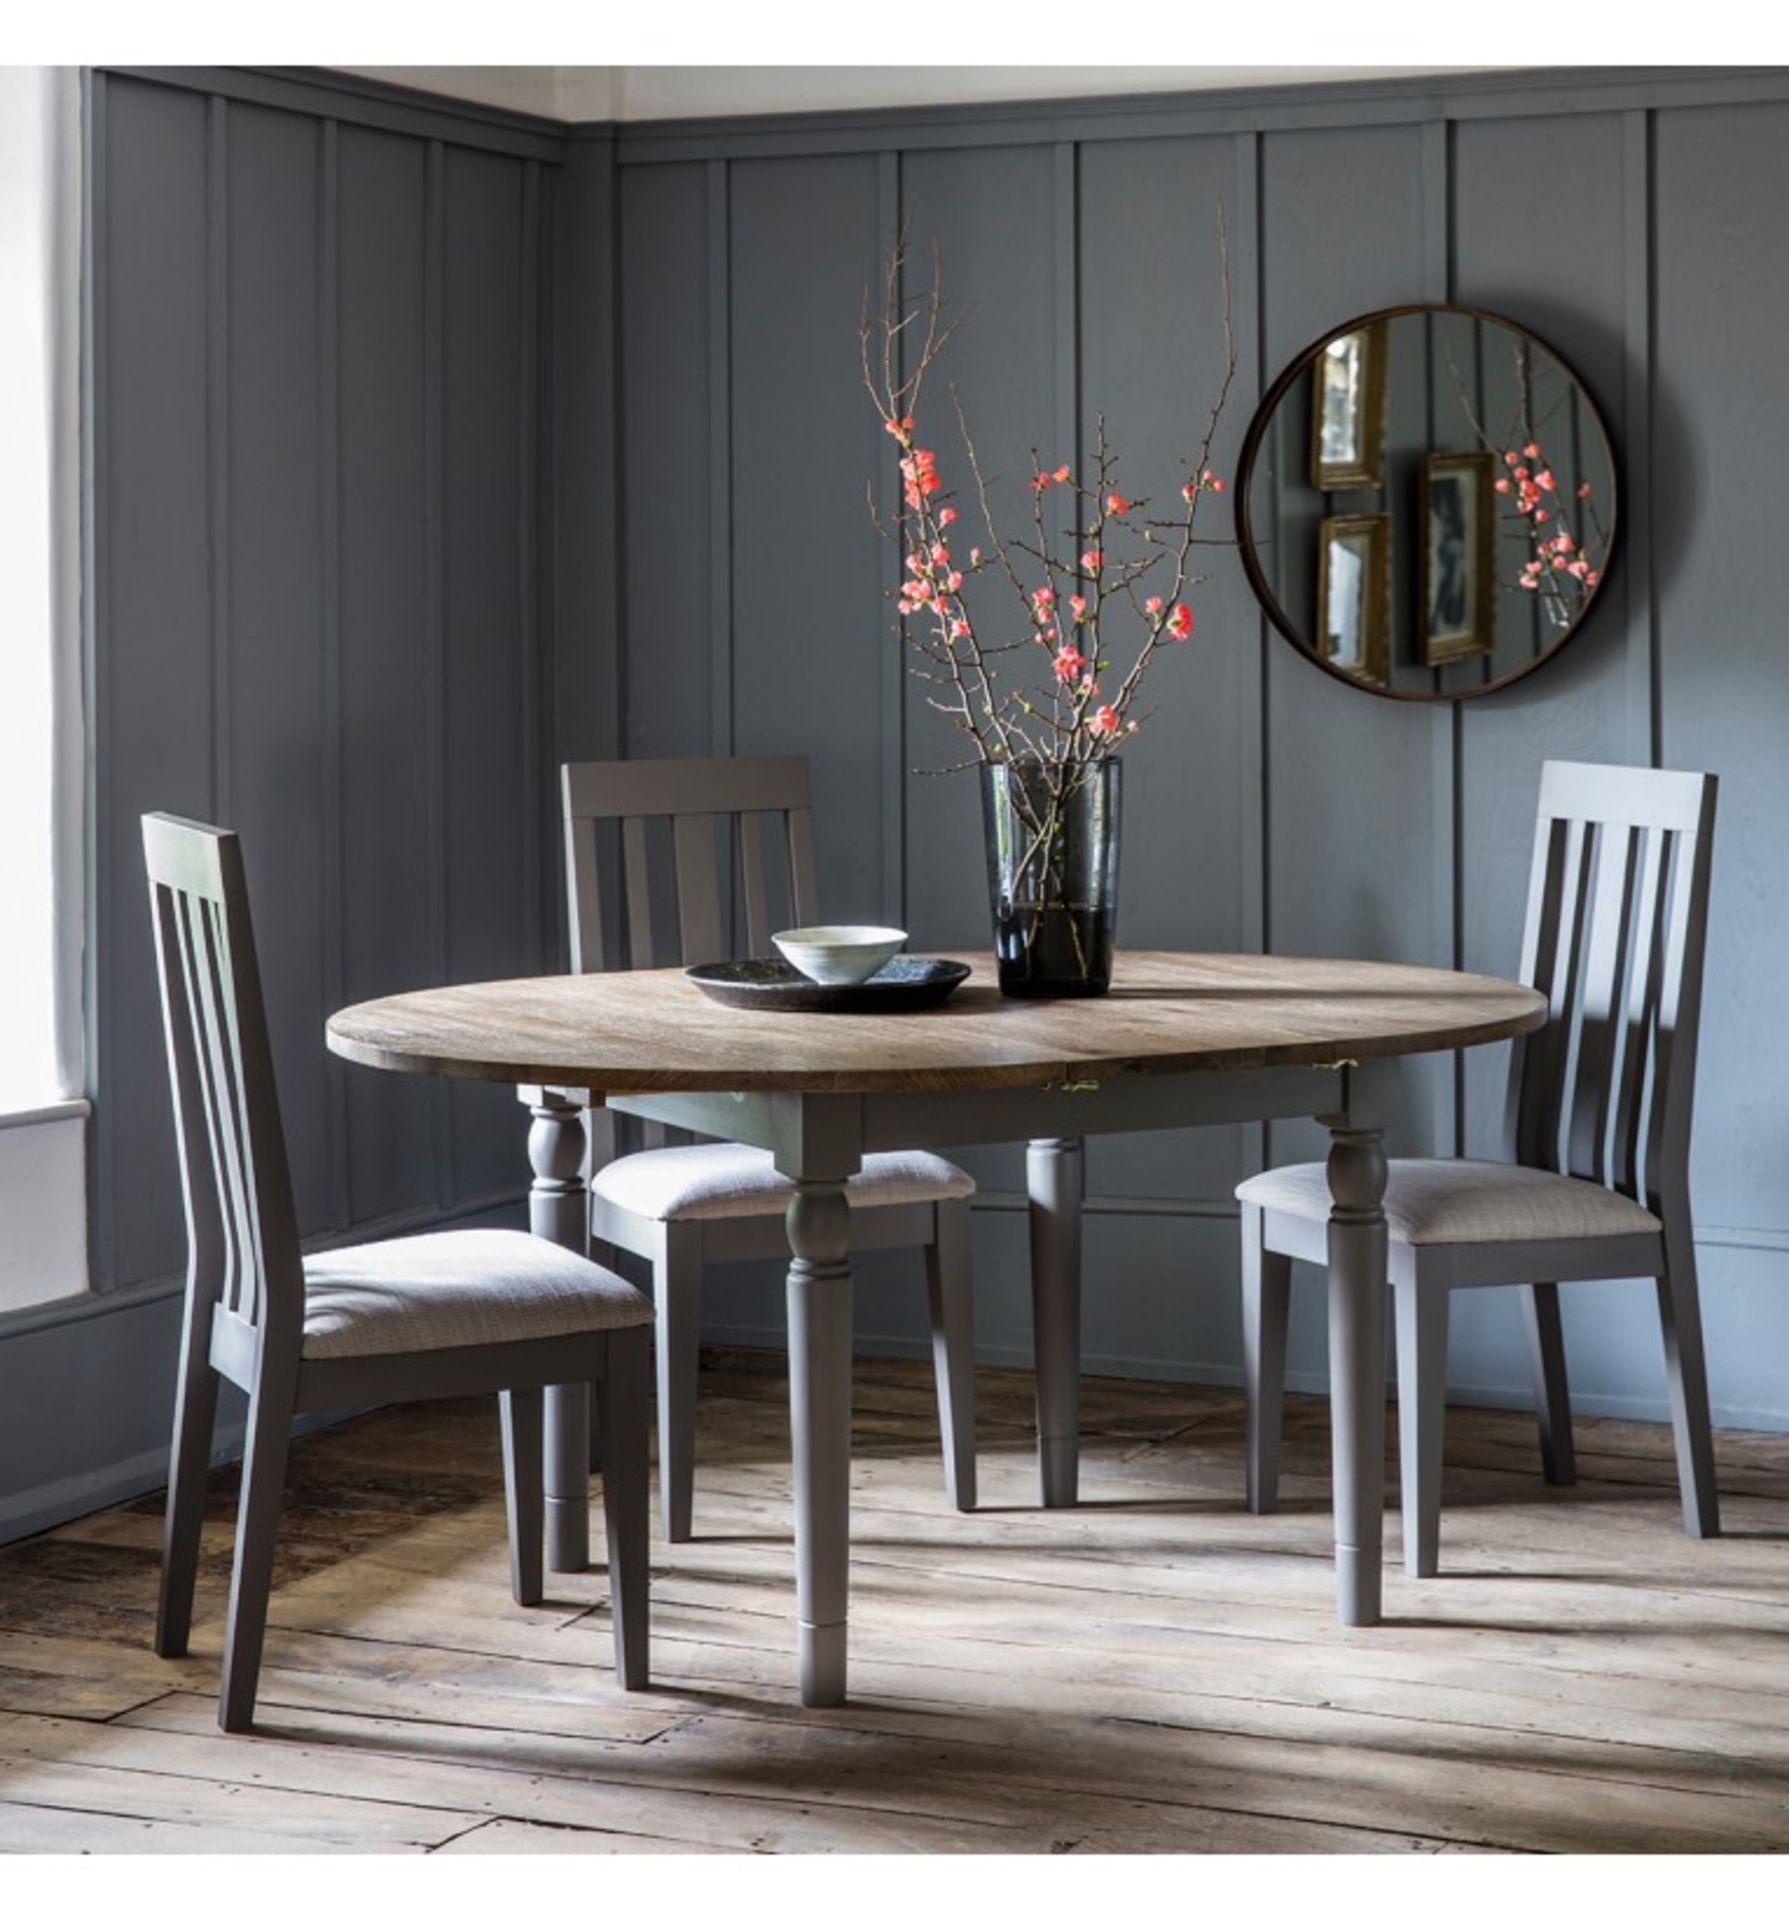 Cookham Round Extending Dining Table Grey A Butterfly Leaf Table Extending To 1550mm, Seating Up - Bild 3 aus 4